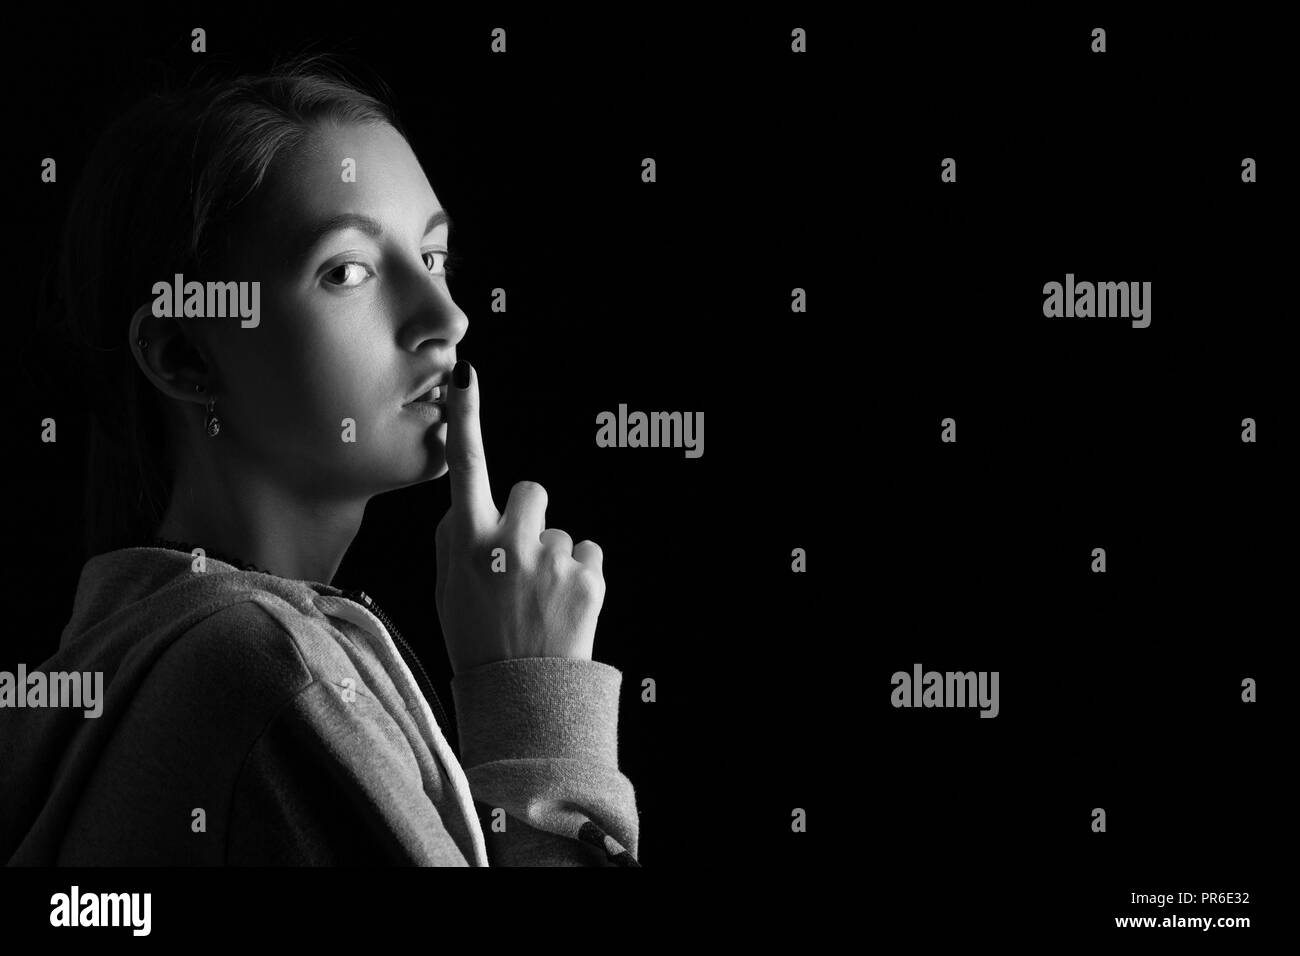 scared girl show silence gesture on black background with copy space, looking at camera, monochrome Stock Photo